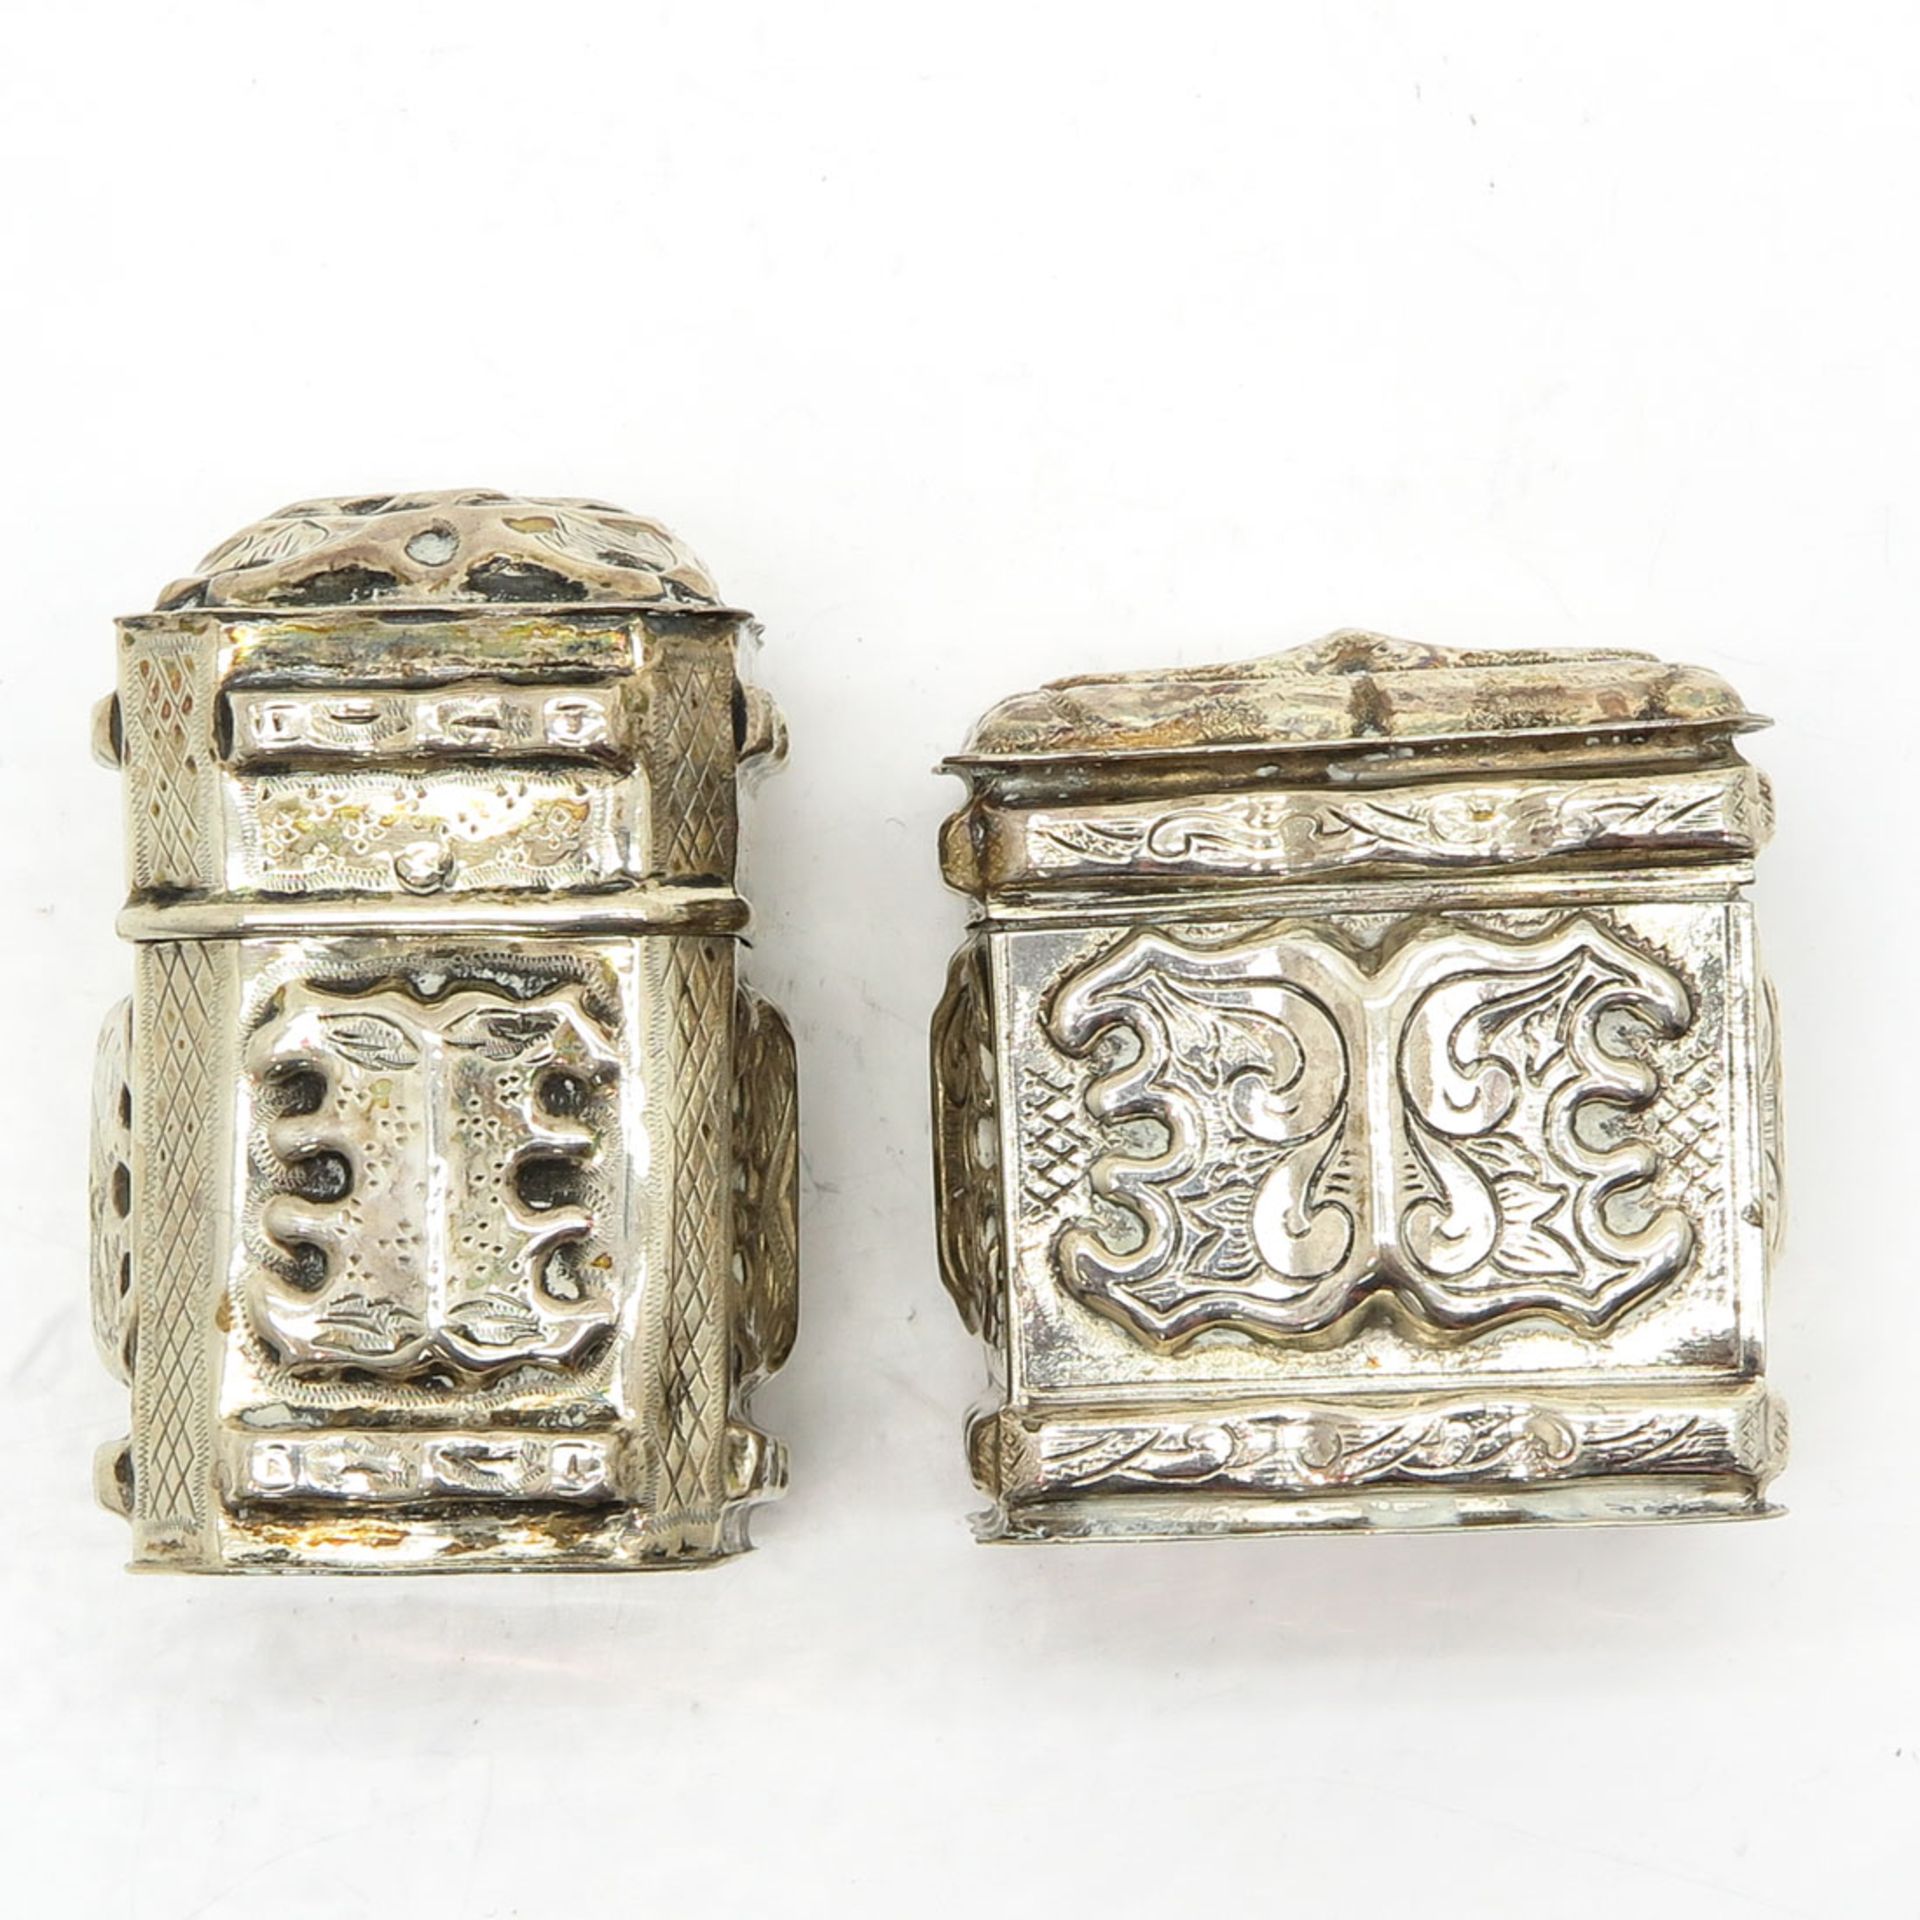 Lot of 2 19th Century Dutch Silver Scent Boxes